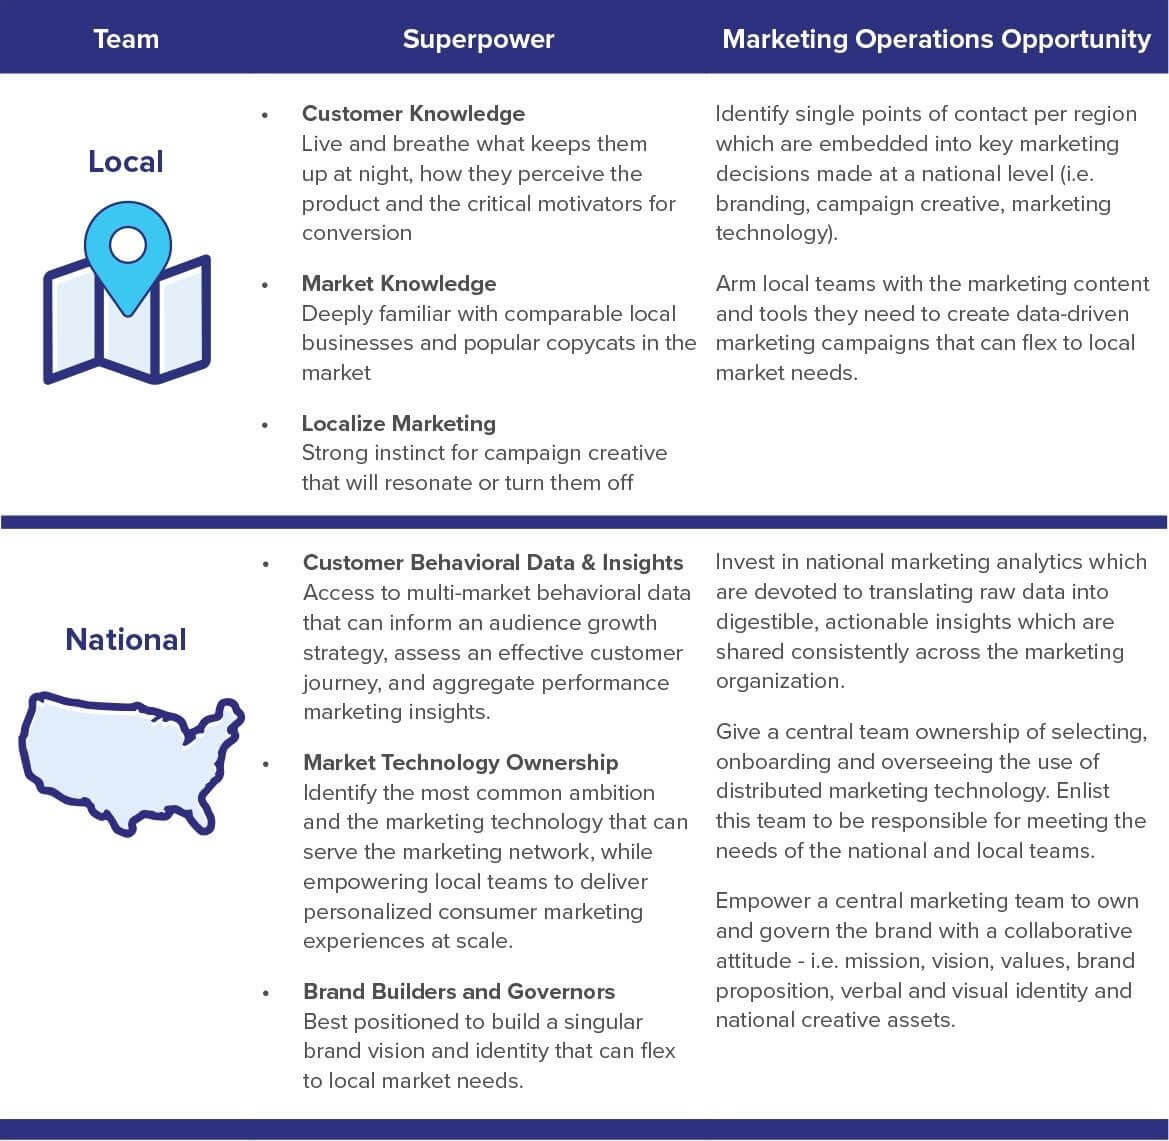 Table of local vs national marketing operations opportunities